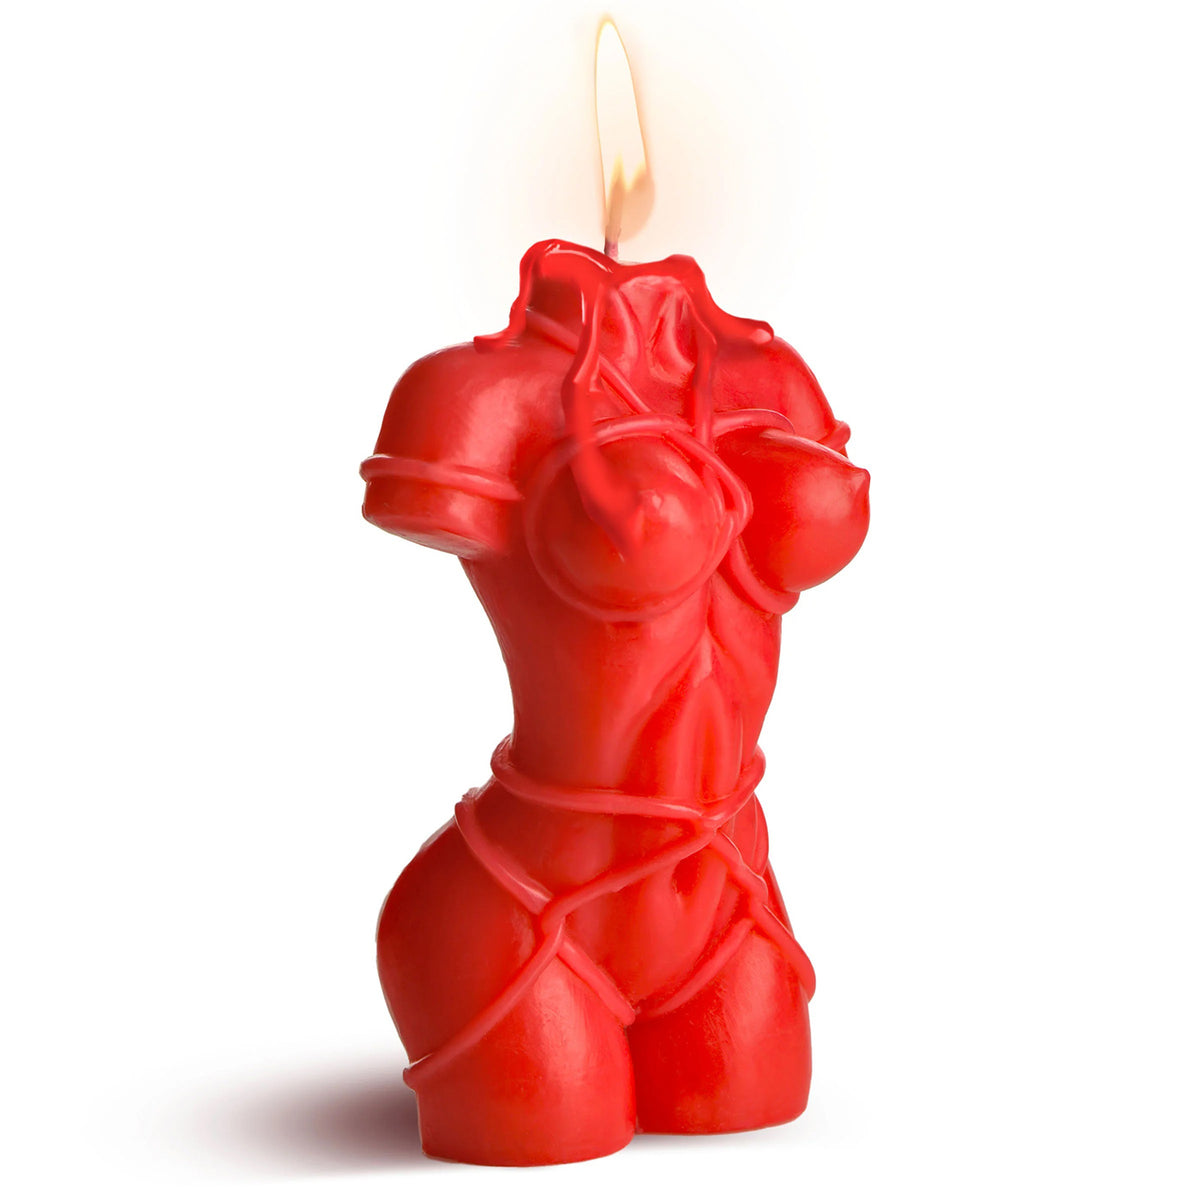 Bound Goddess Drip Candle - Red